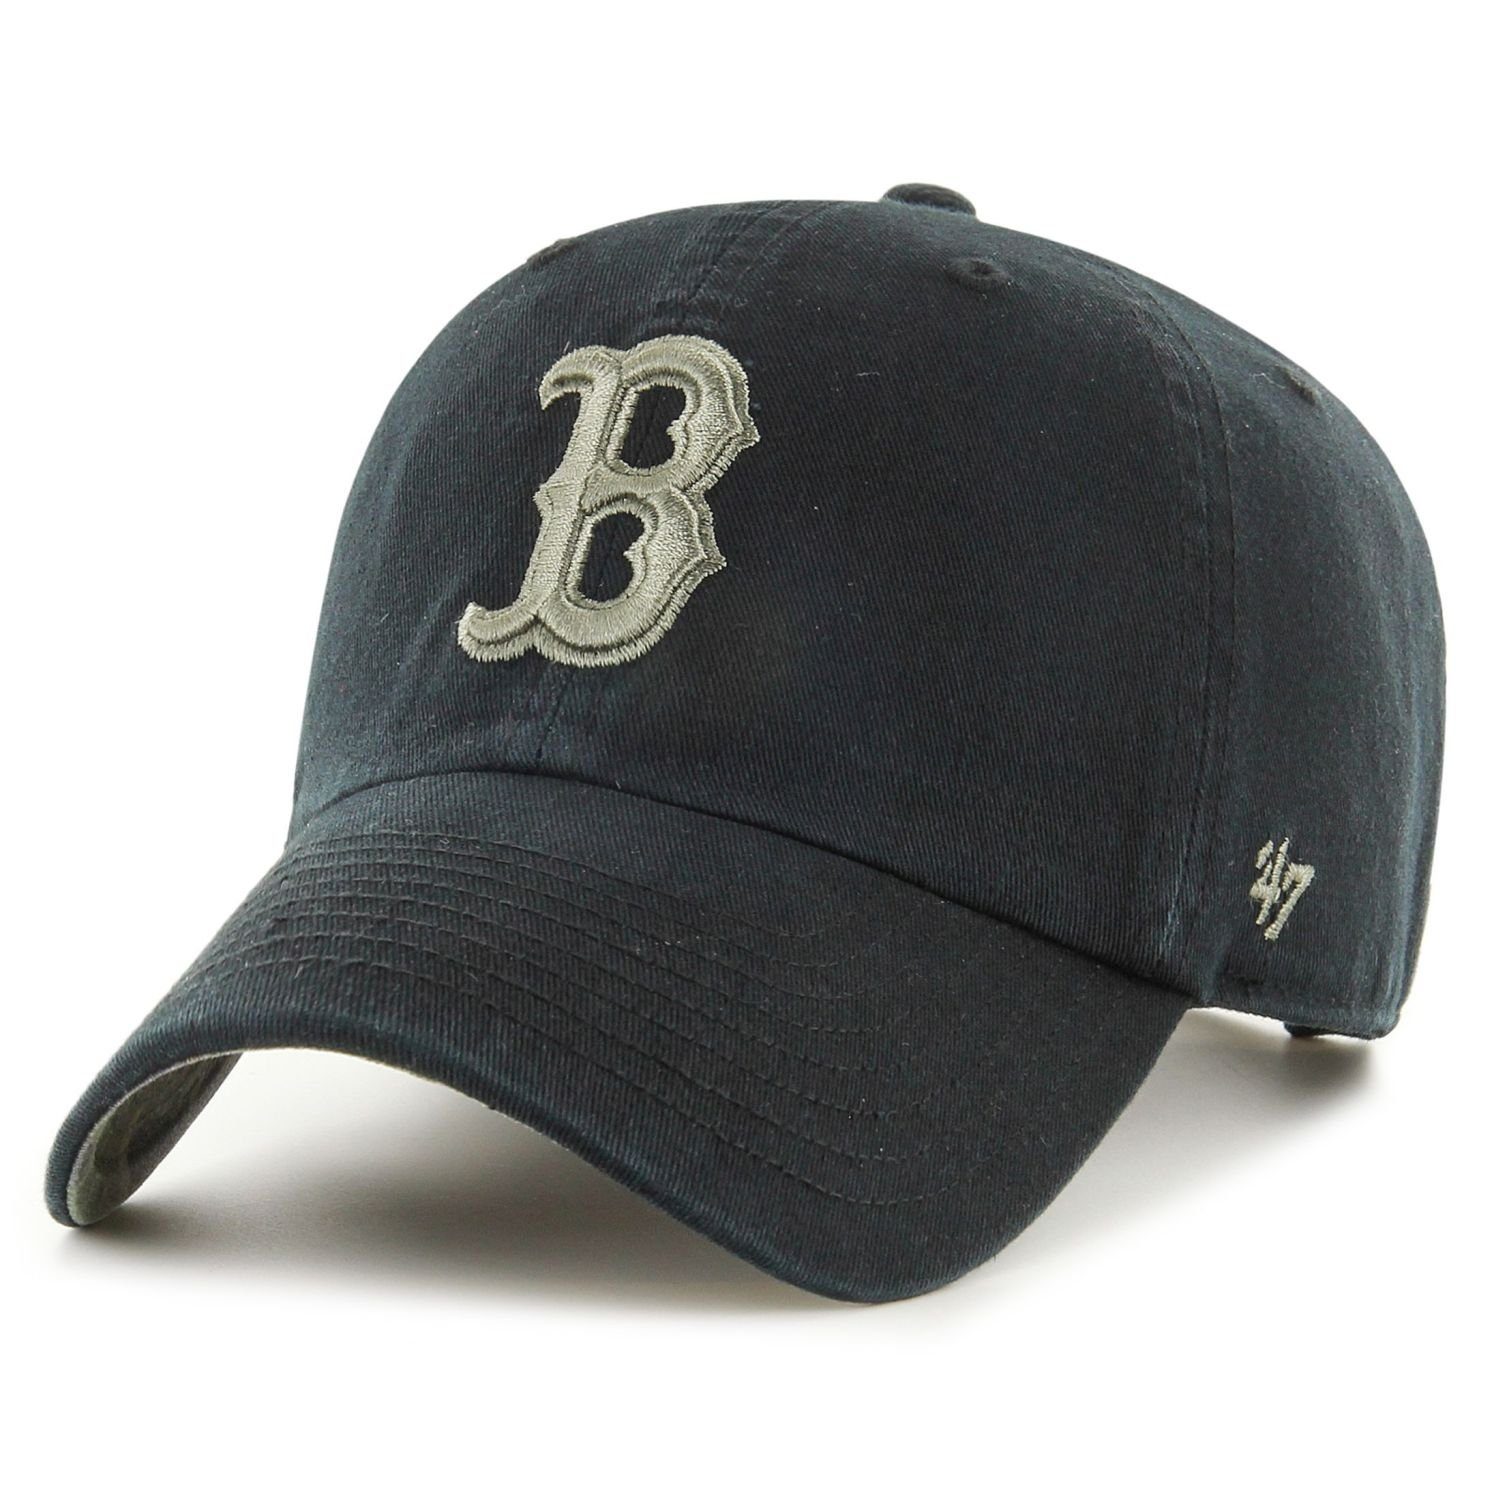 '47 Brand Trucker Cap Relaxed Fit CLEAN UP Boston Red Sox